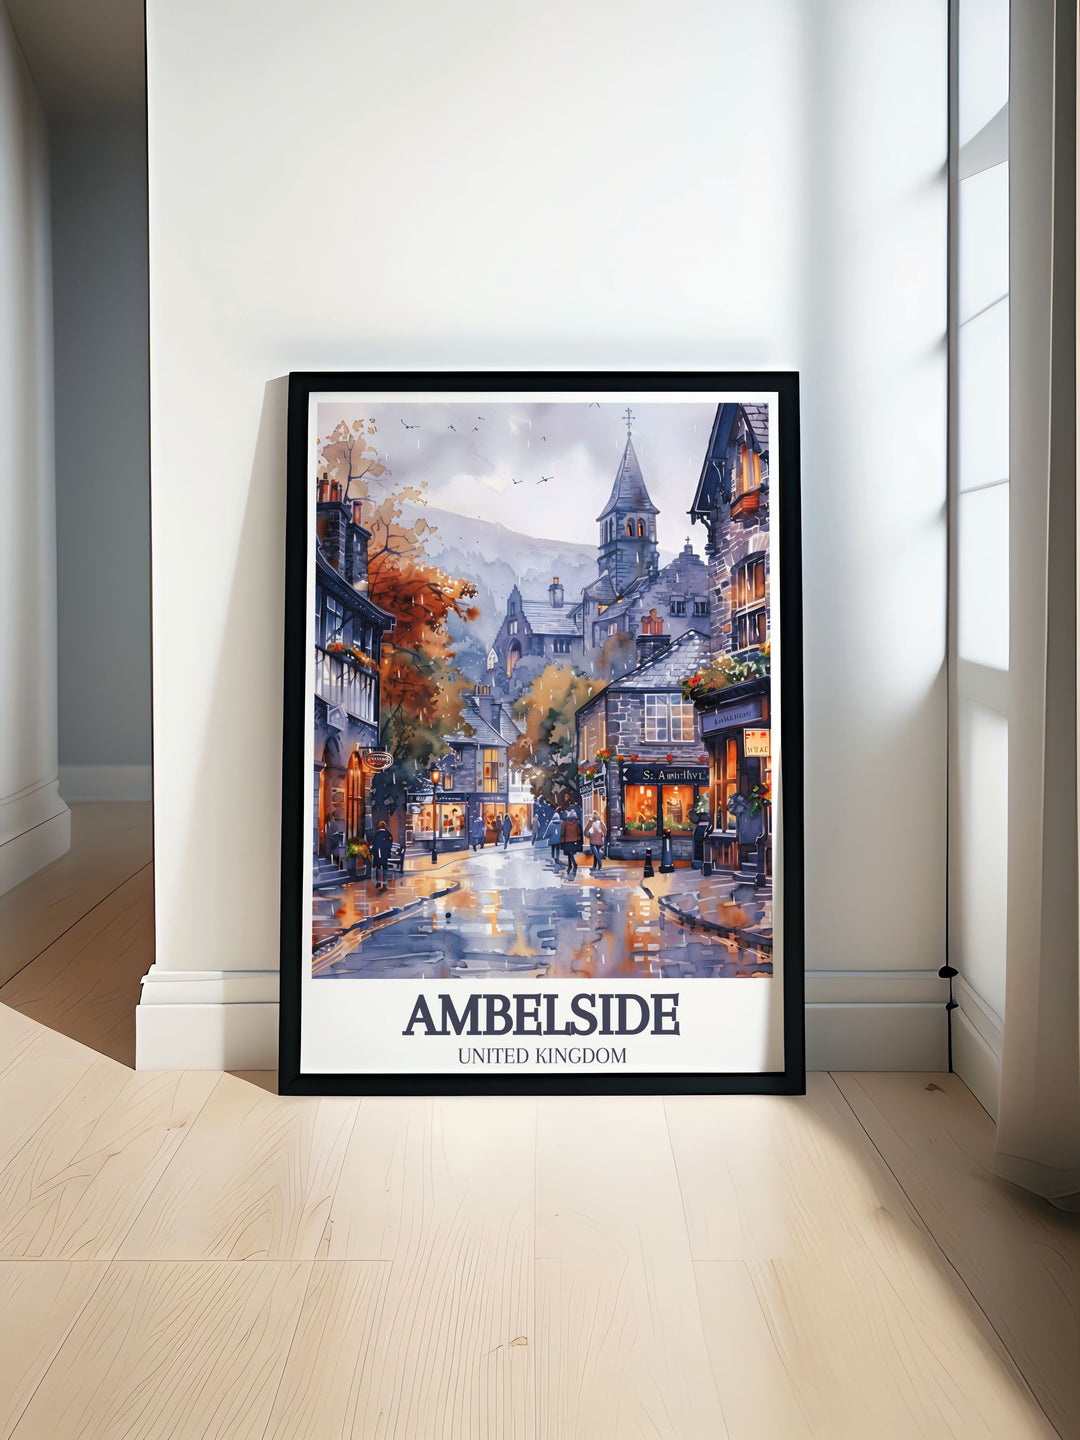 Stunning wall art featuring St. Marys Church in Ambleside, United Kingdom, showcasing the serene beauty and intricate details of this iconic site.